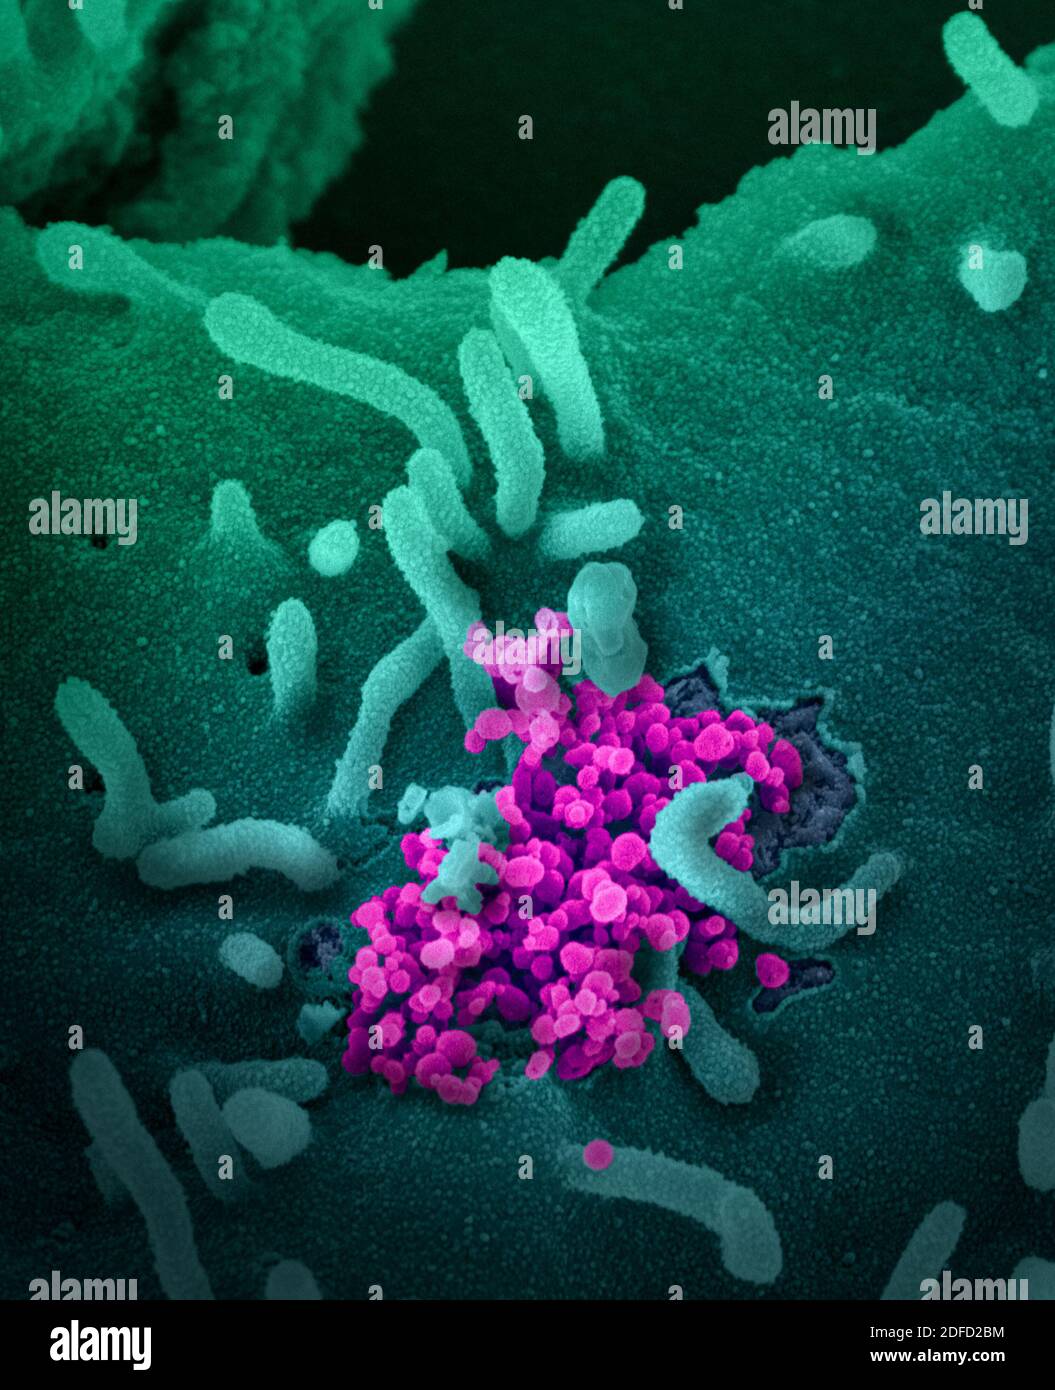 This scanning electron microscope image shows SARS-CoV-2 (round magenta objects) emerging from the surface of cells cultured in the lab. SARS-CoV-2, a Stock Photo